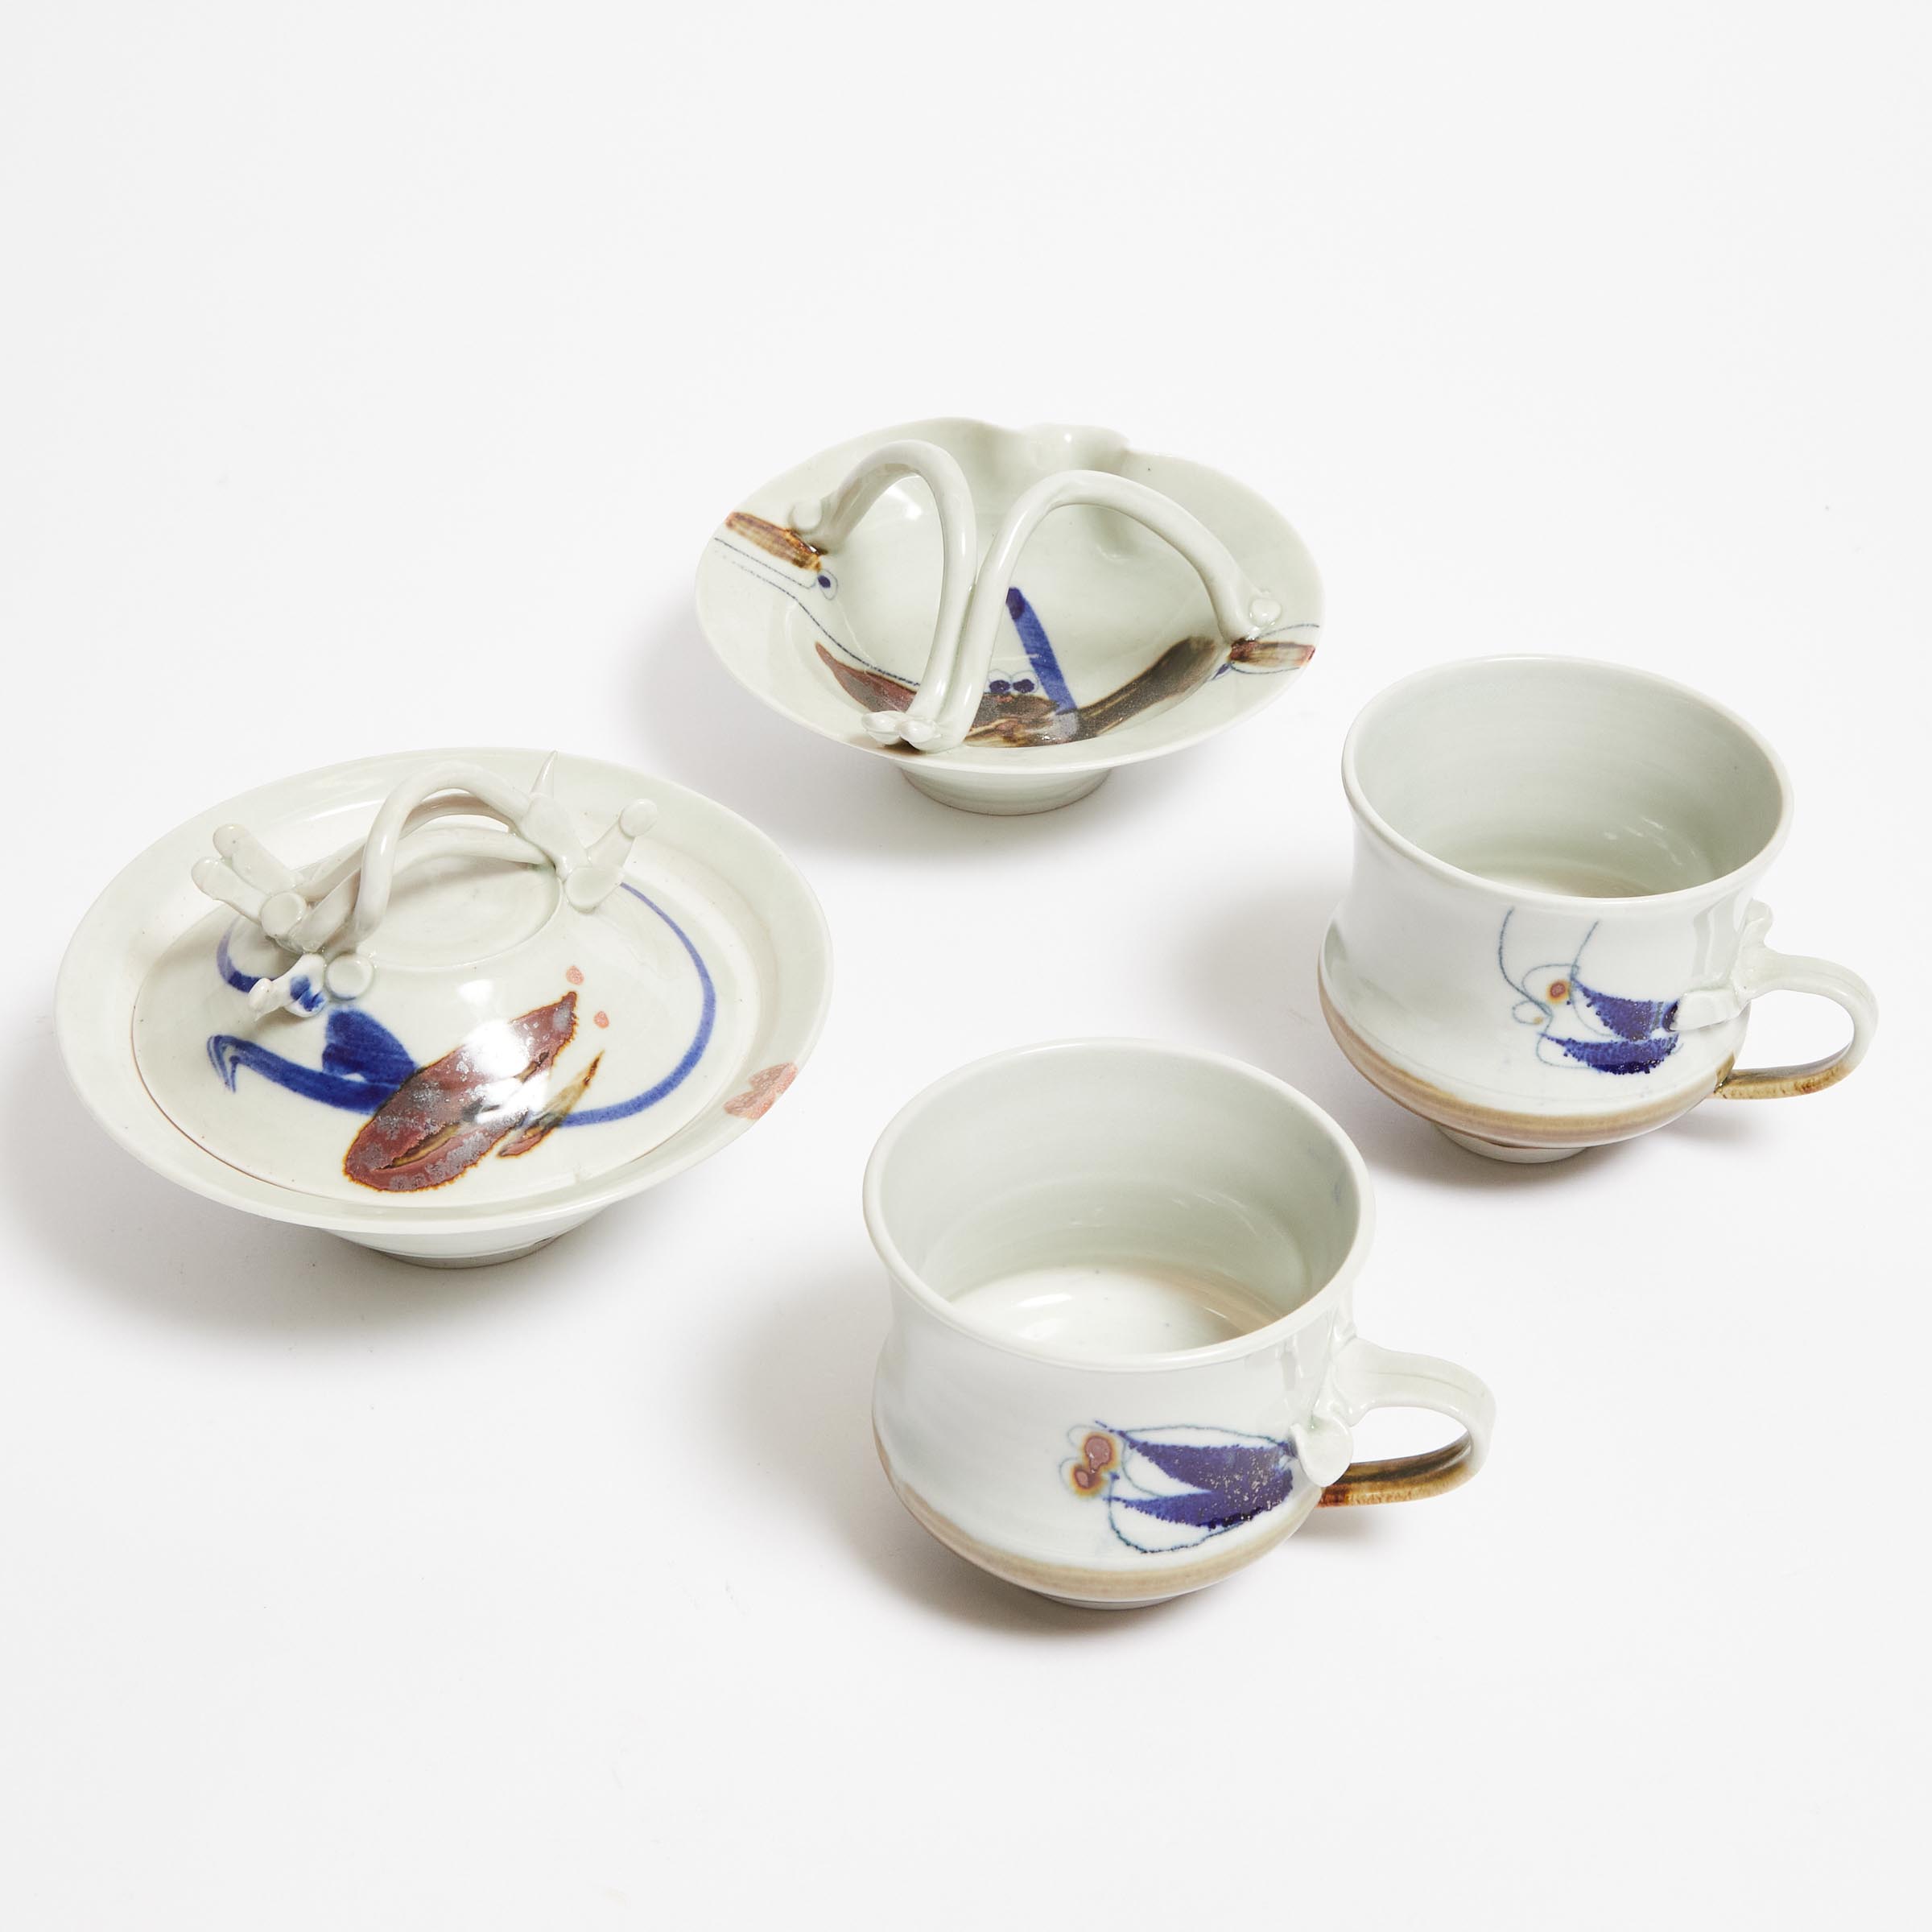 Kayo O'Young (Canadian, b.1950), Two Mugs, Covered Bowl, and a Small Dish, 1979, covered bowl diamet